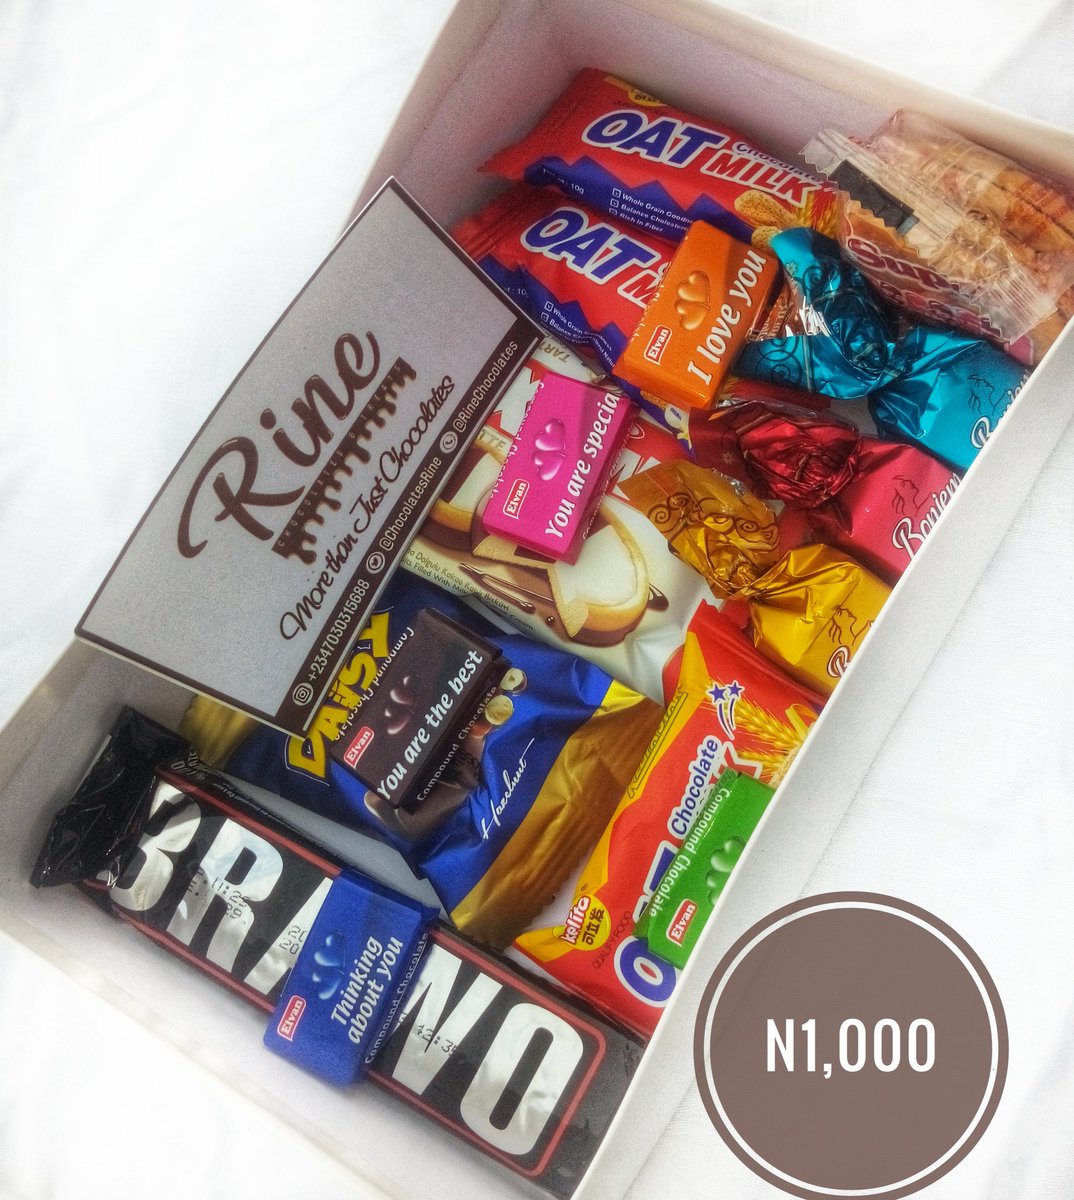 This is our LICKY LICKY Chocolate box.It is 1,000 naira.